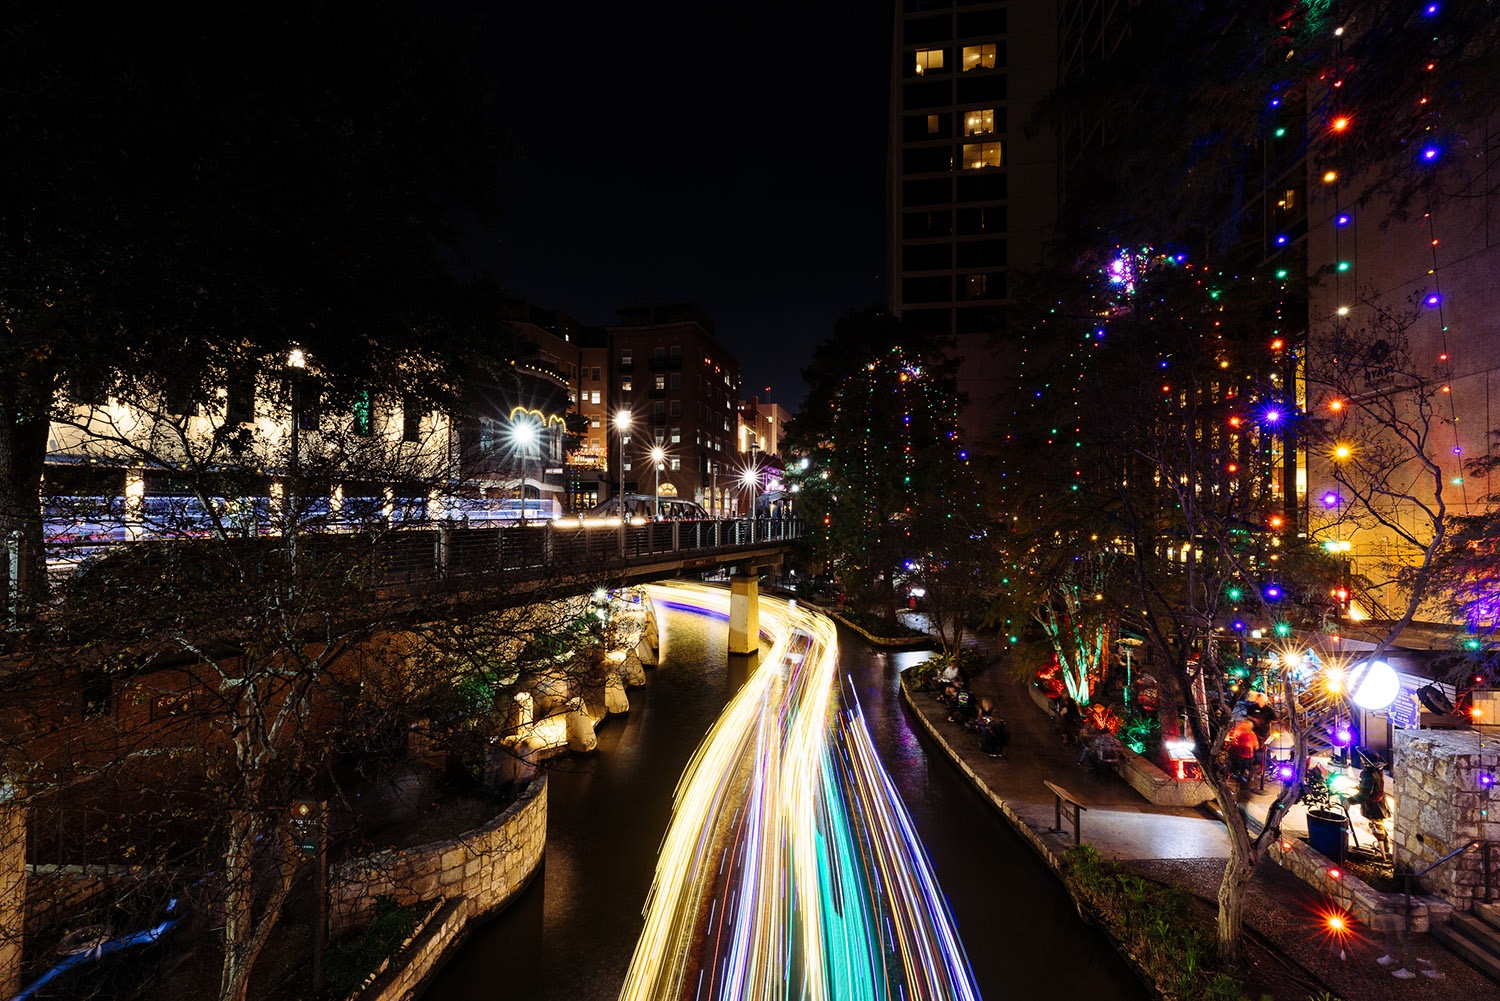 Scenes from the Alamo, the River Walk and other popular locations in downtown San Antonio this time of the year. Dec. 9, 2021. Photo by Chris Stokes | Heron contributor